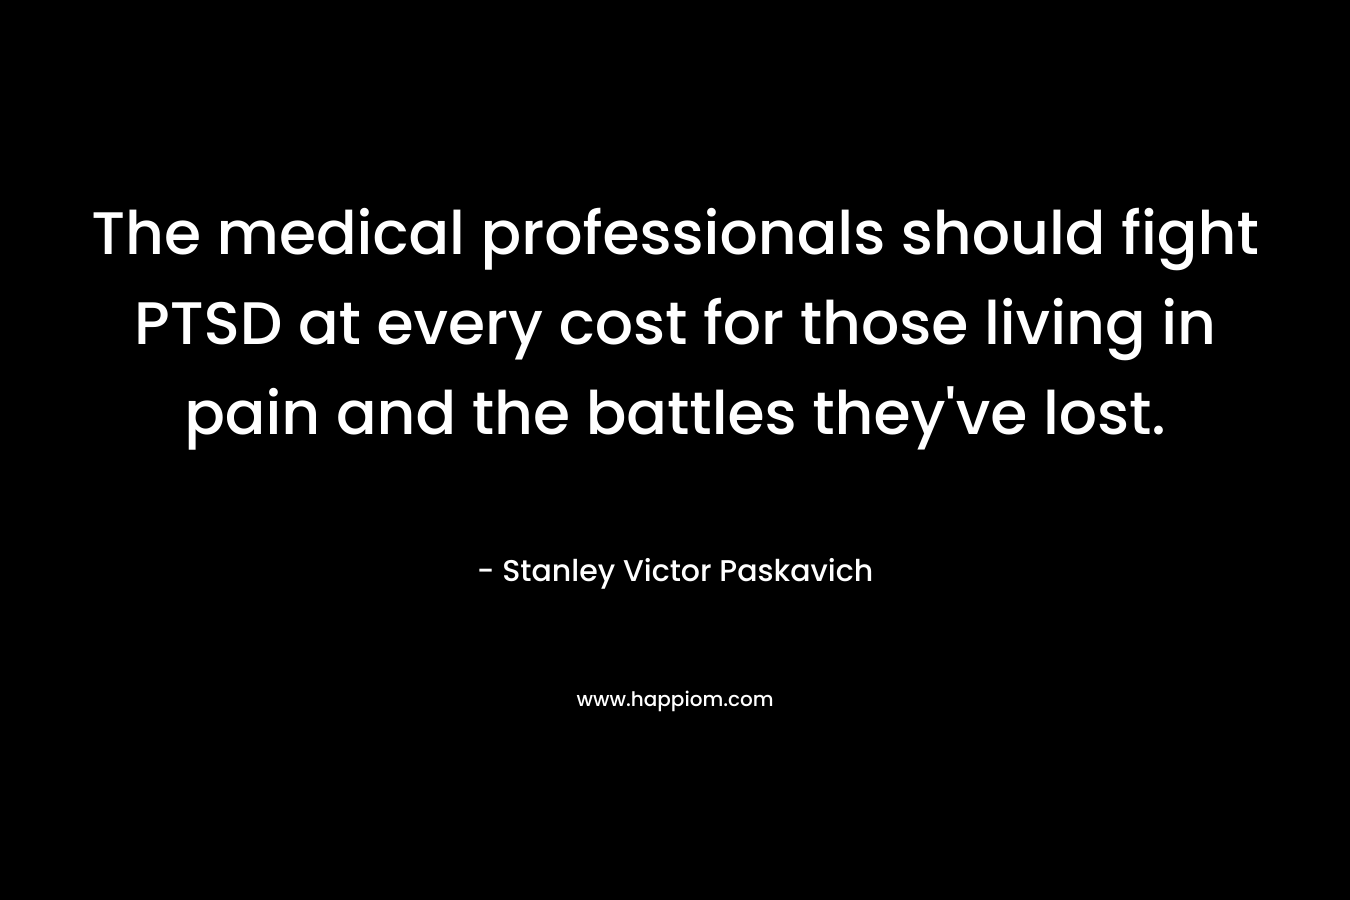 The medical professionals should fight PTSD at every cost for those living in pain and the battles they’ve lost. – Stanley Victor Paskavich